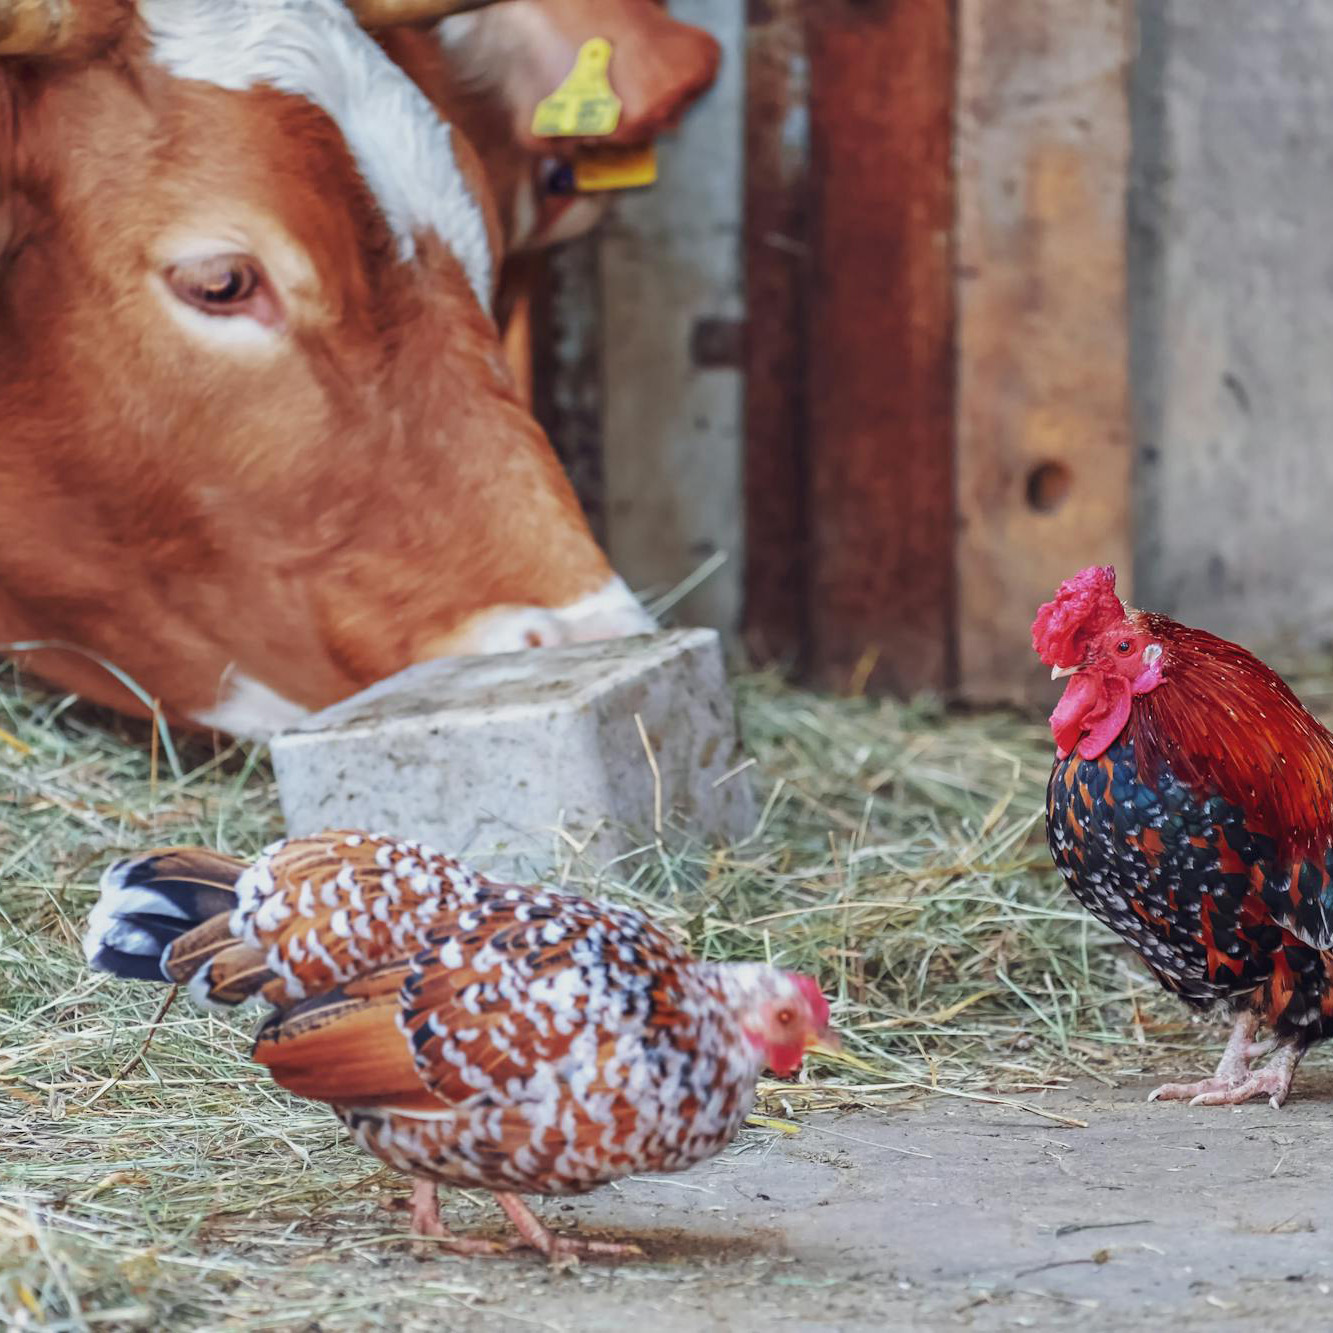 Cow and two chickens standing in hay. Photo by Ilo Frey on Pexels.